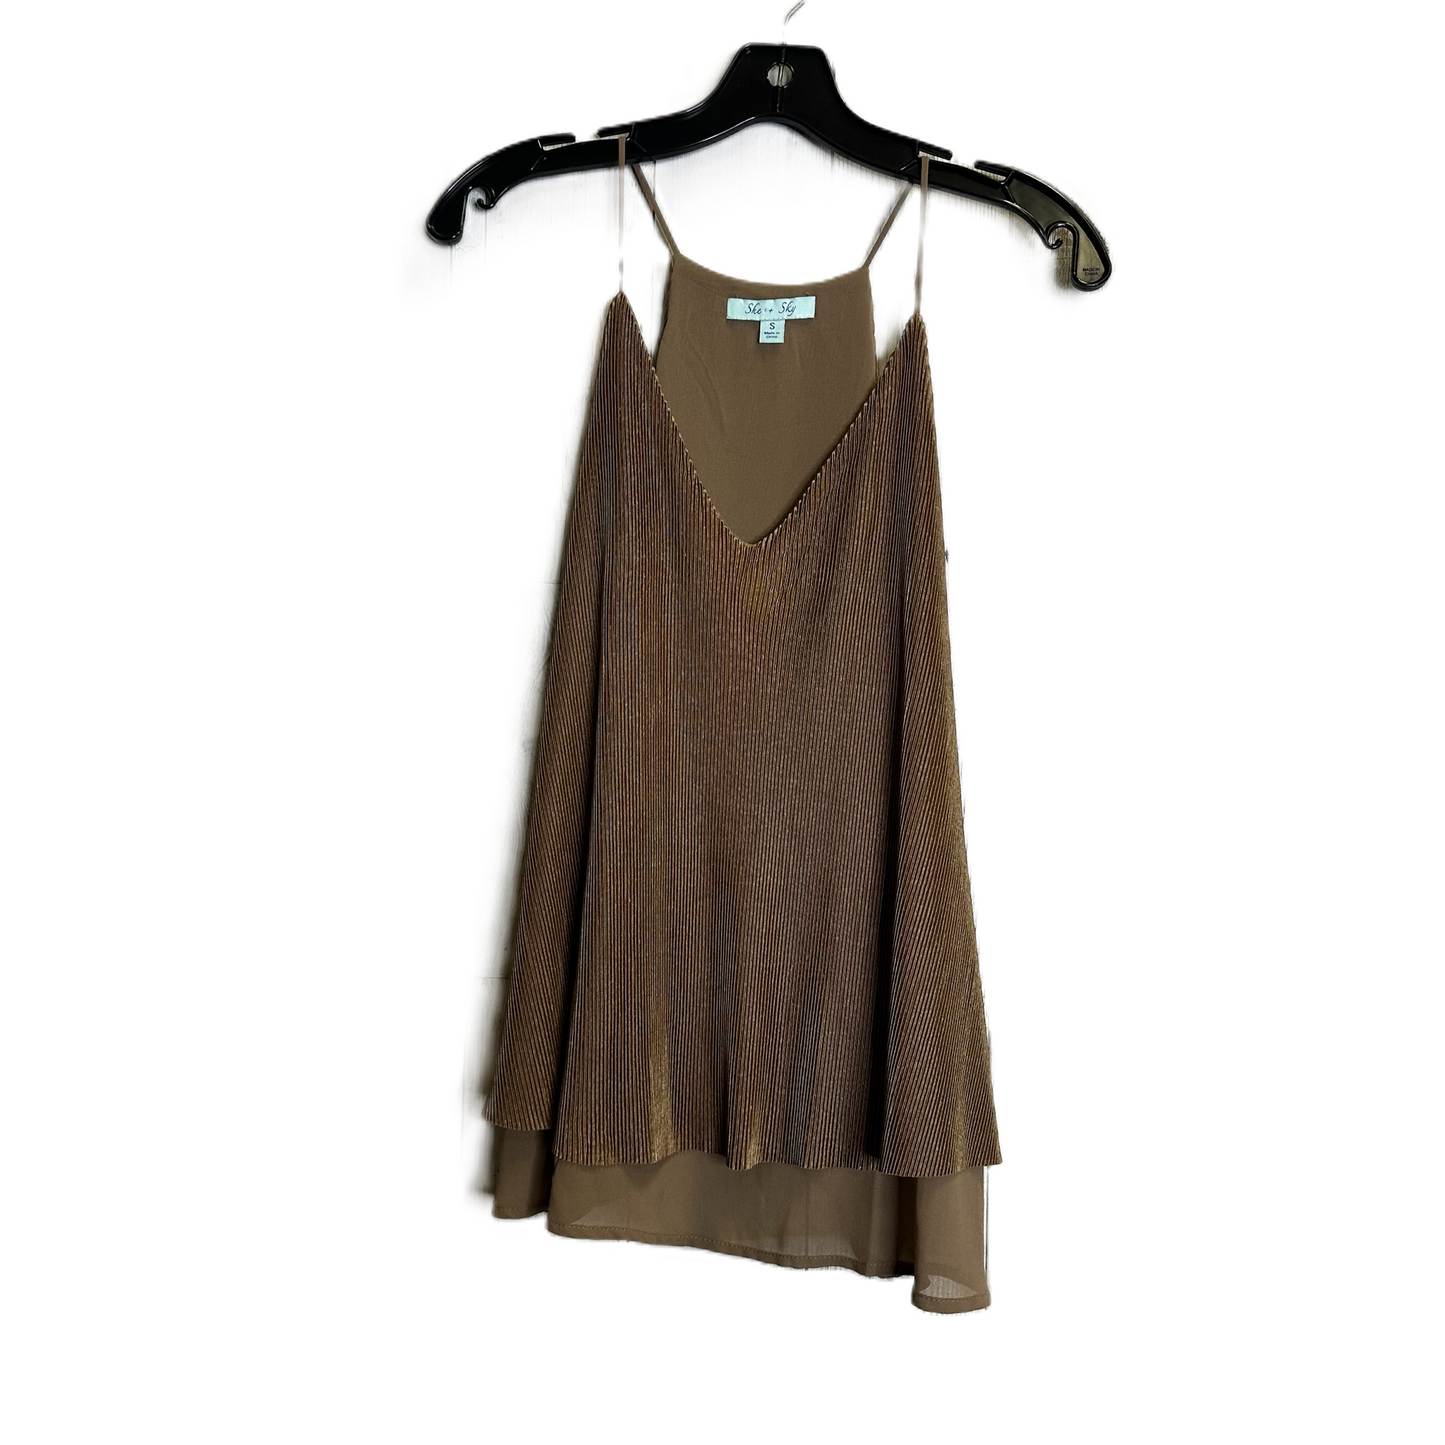 Tan Top Sleeveless By She + Sky, Size: S